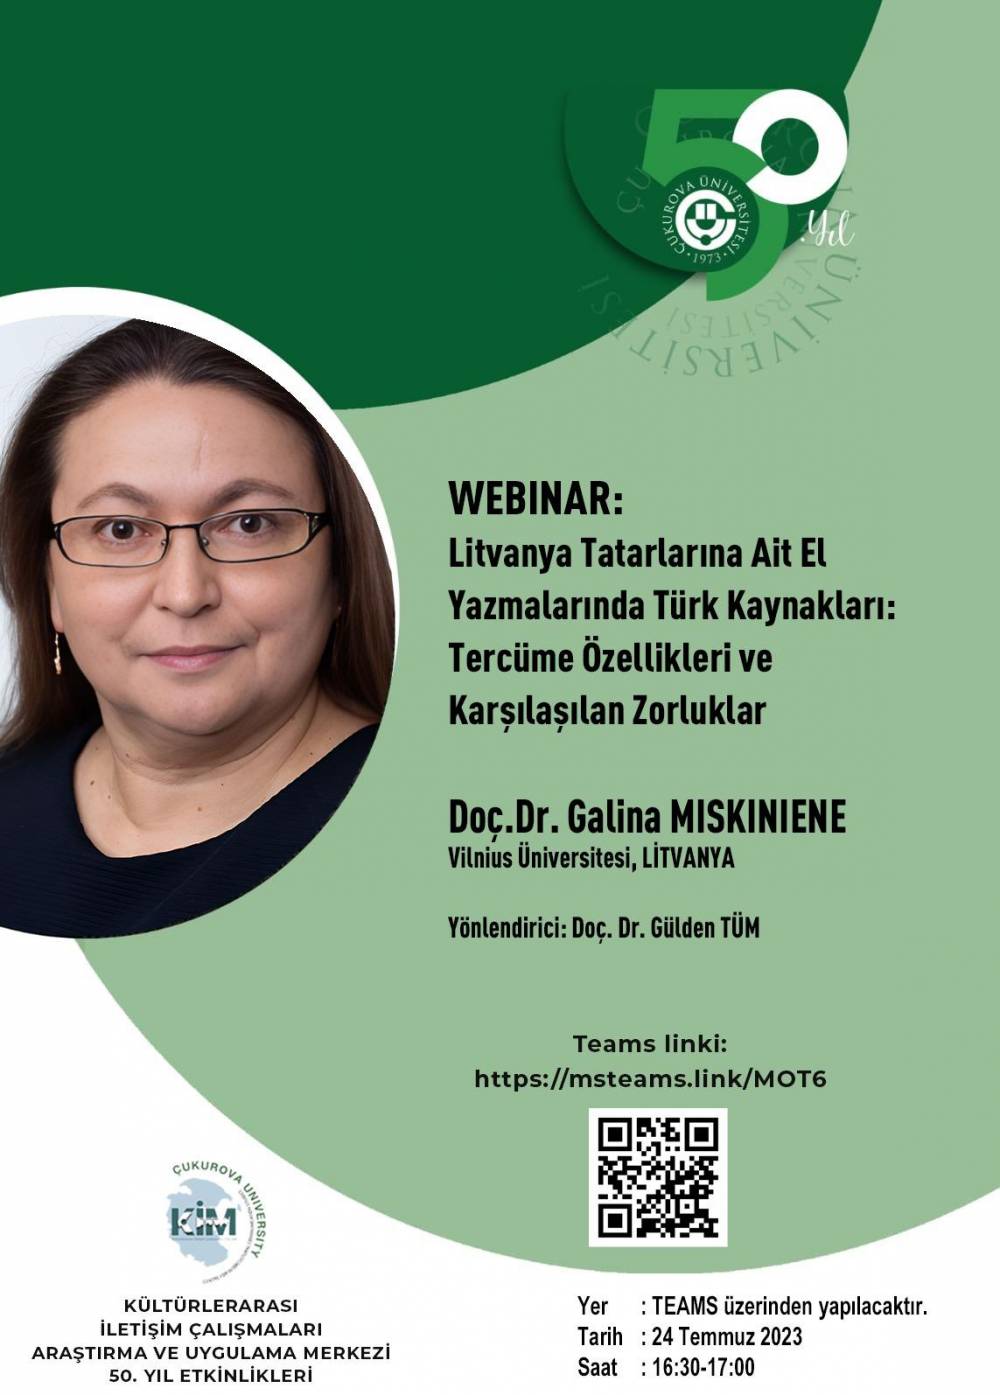 ICC Webinar: Assoc. Prof. Galina Miskiniene - Turkish Sources in Manuscripts of Lithuanian Tatars: Translation Characteristics and Challenges